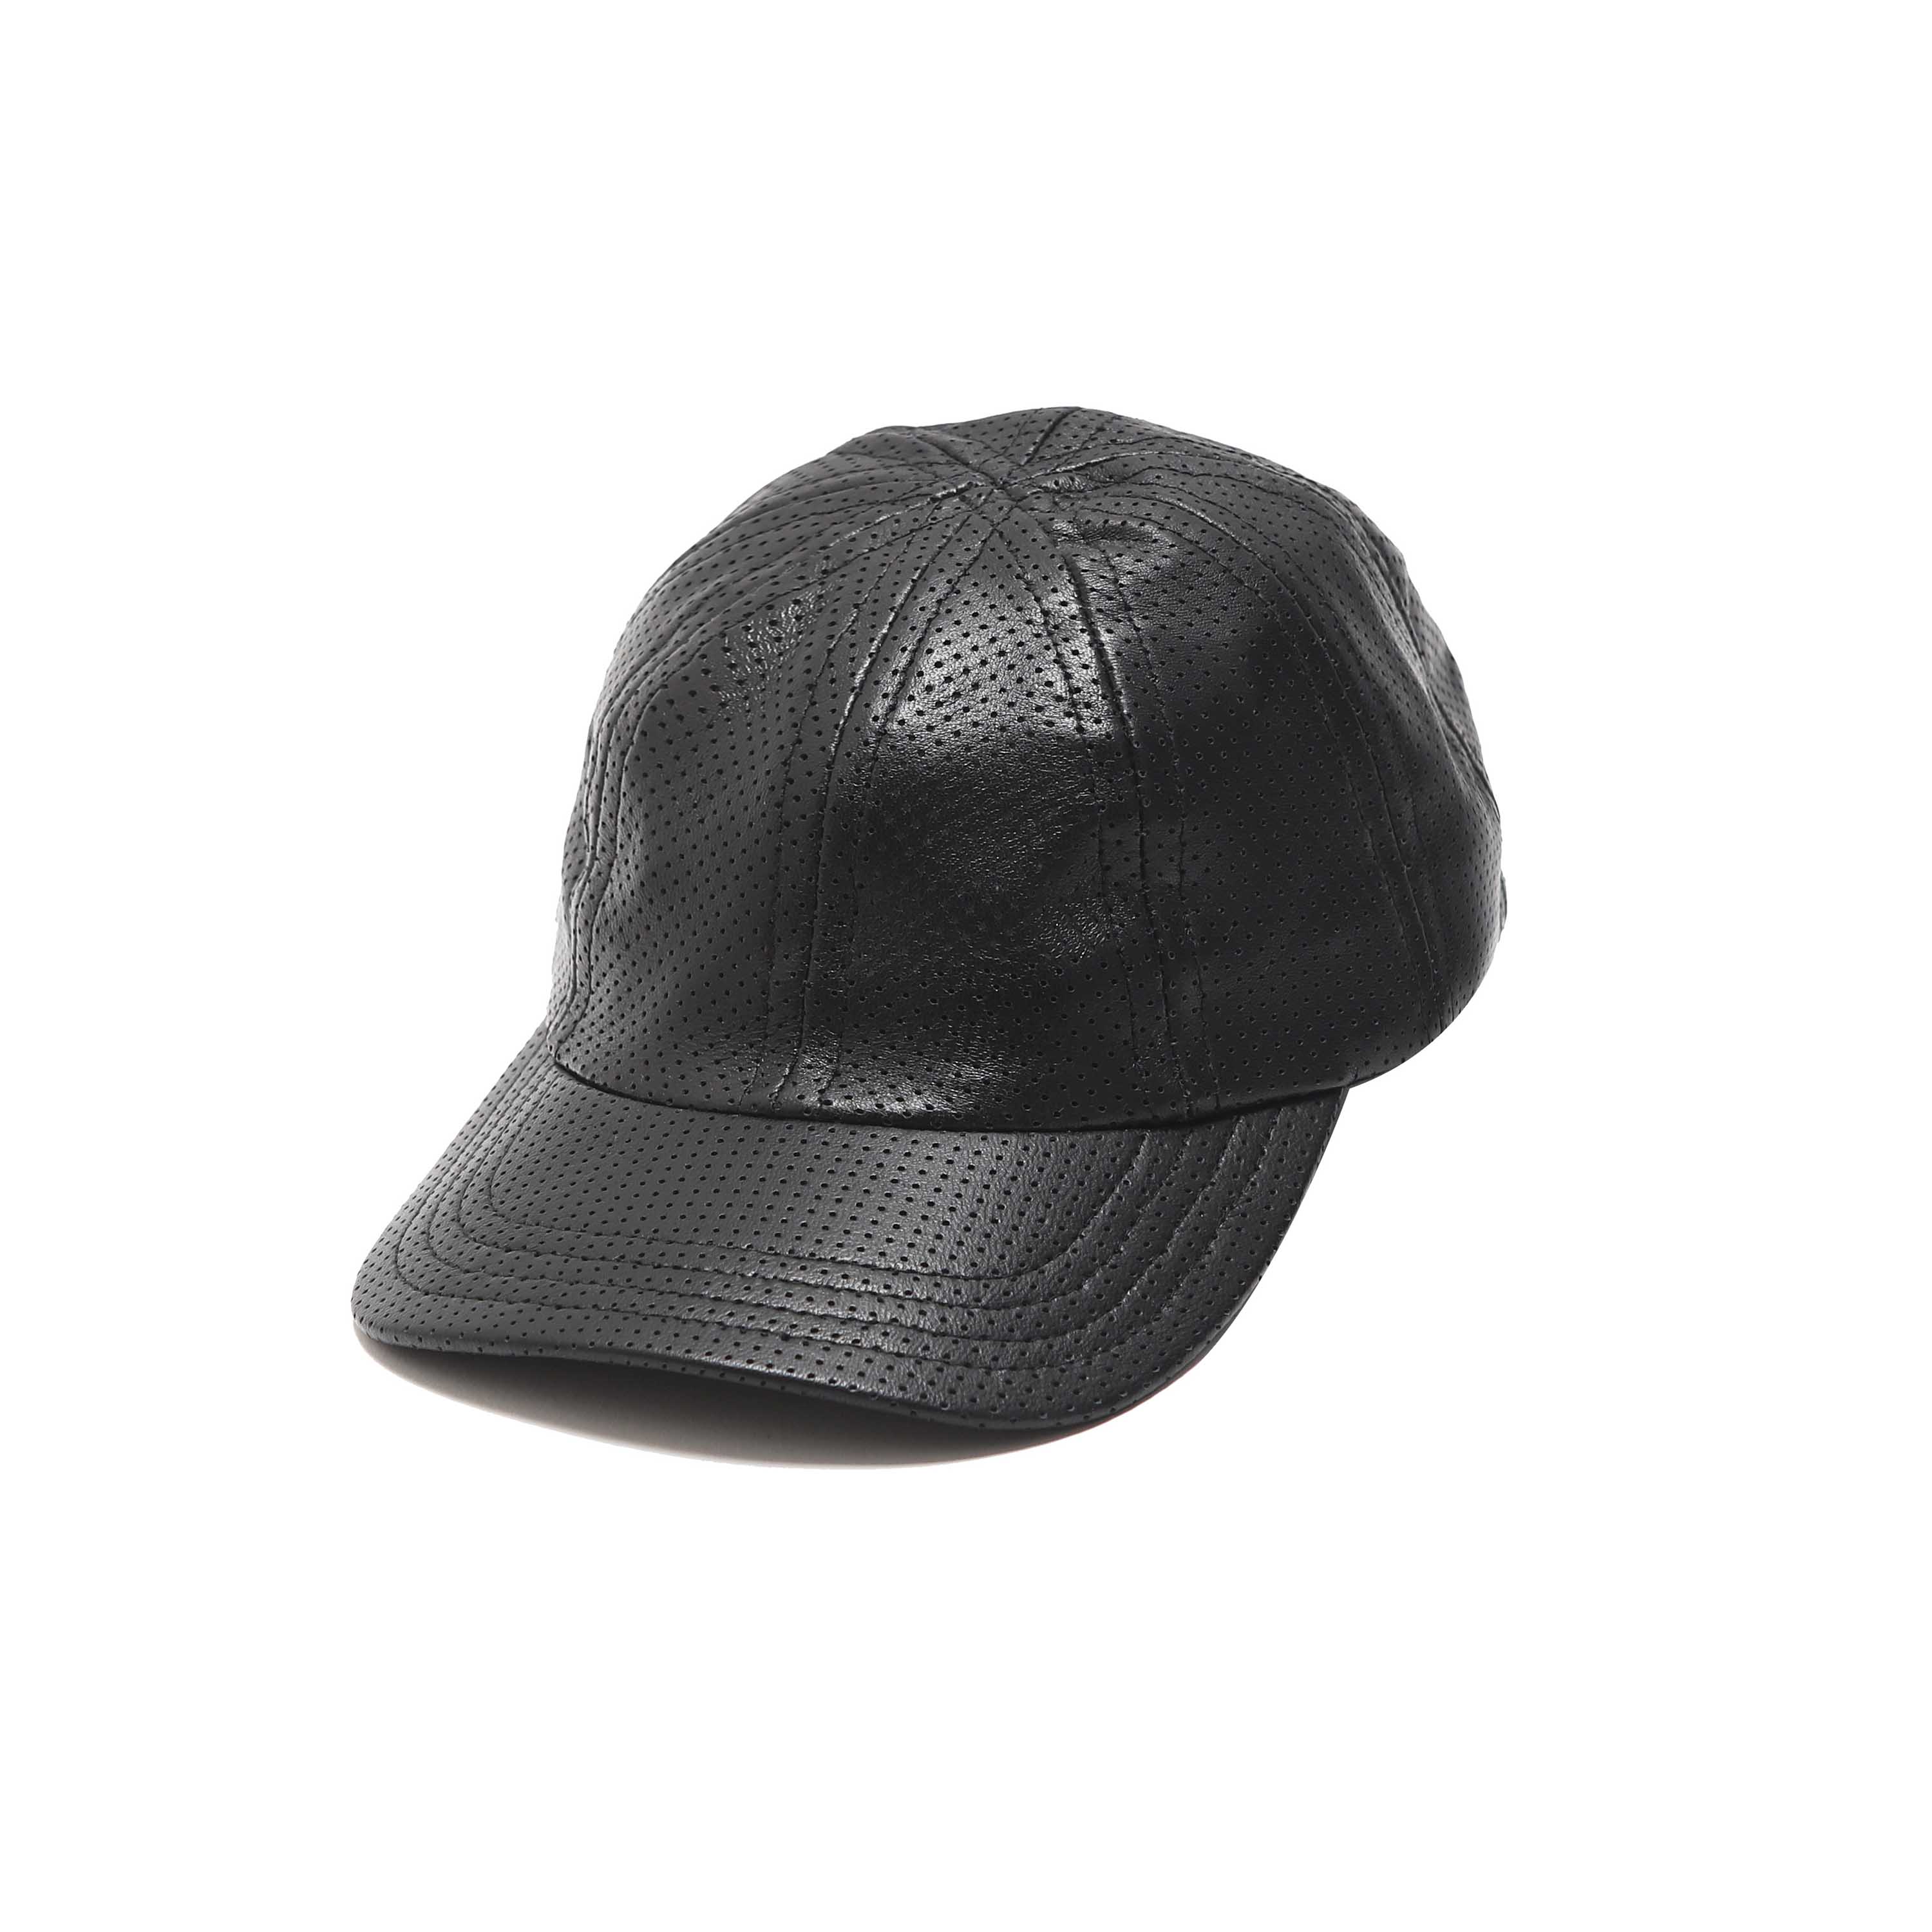 EIGHT PANEL BALL CAP - PERFORATED BLACK